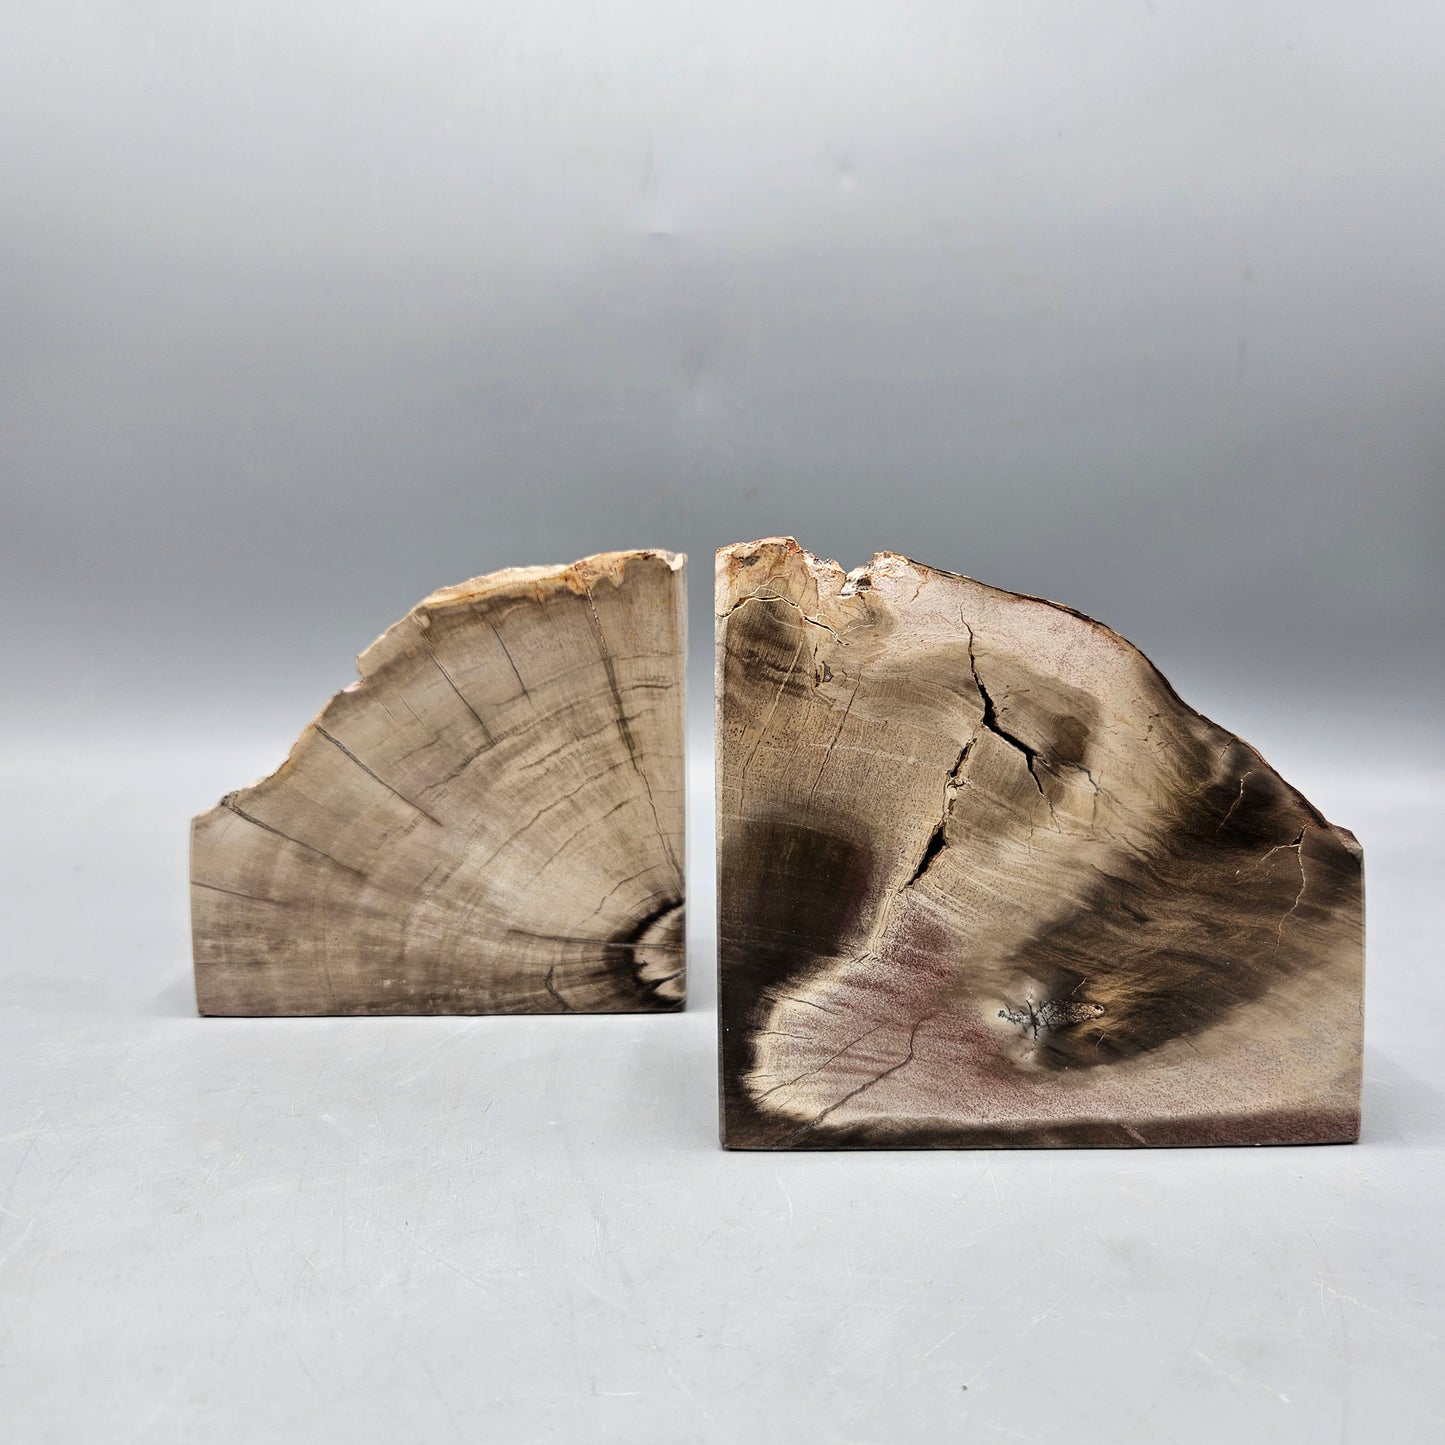 Pair of Petrified Wood Bookends